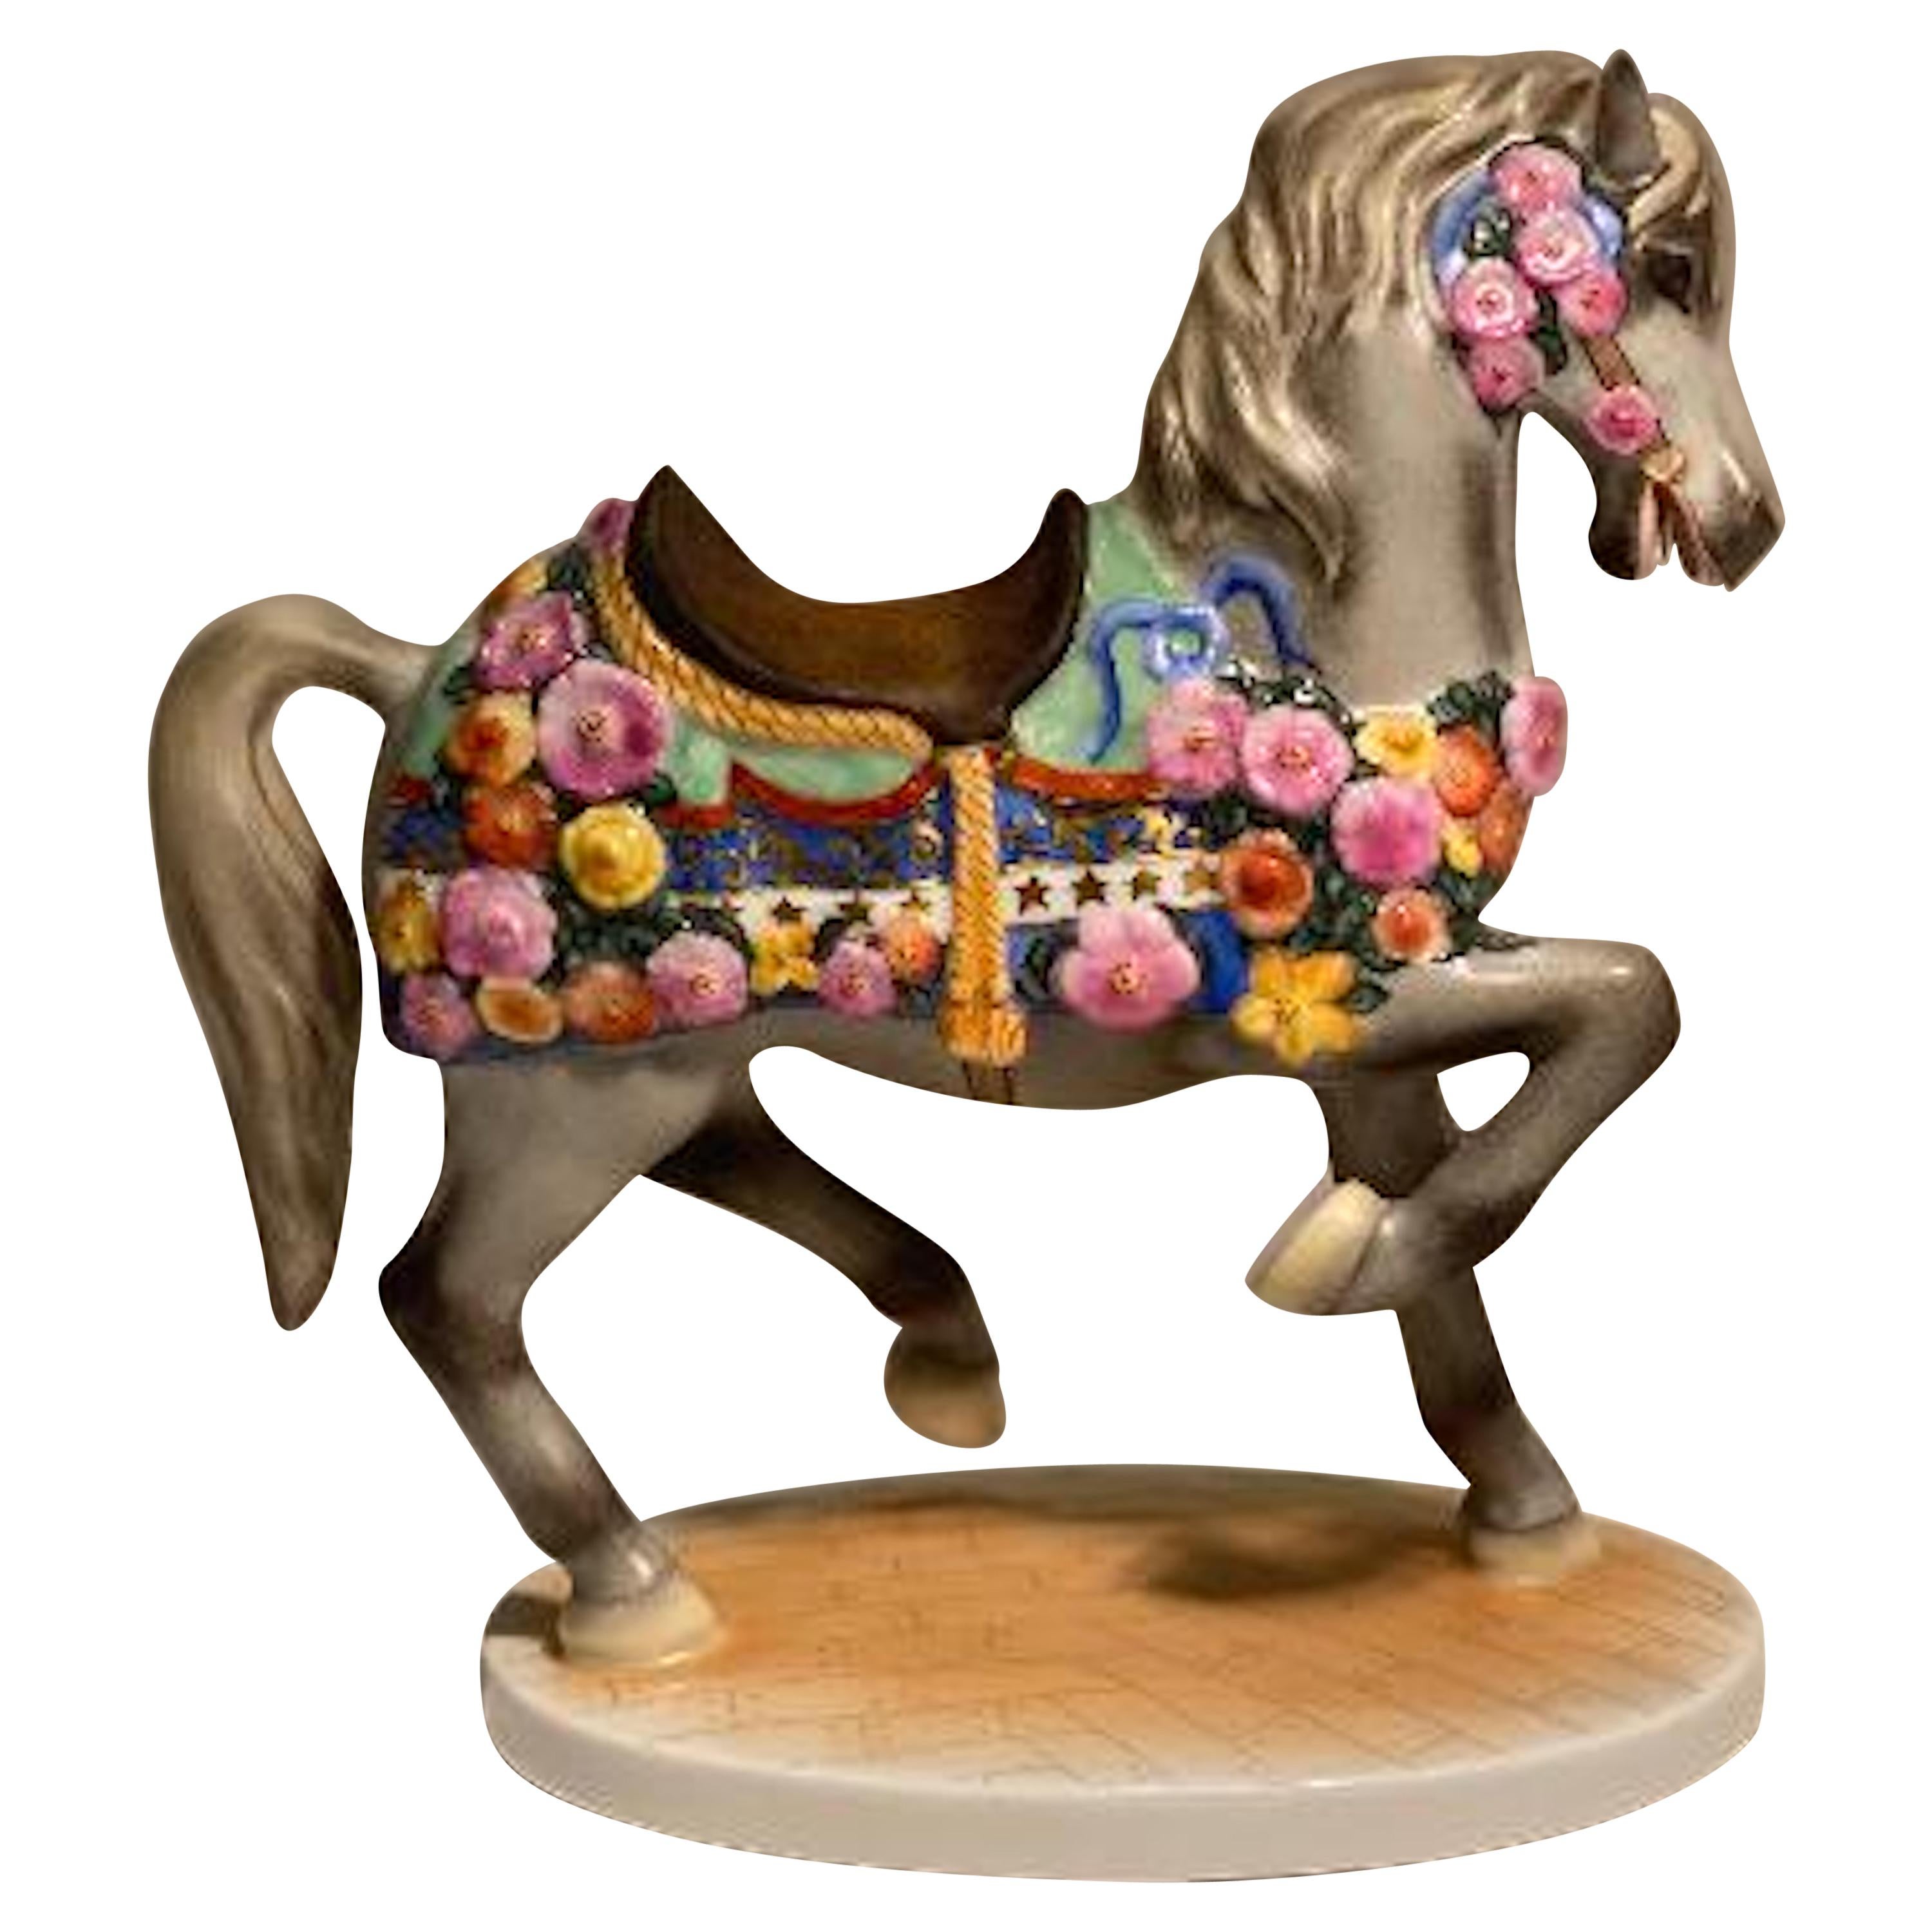 Herend Finest Quality Hand Painted Porcelain Carousel Horse Figurine